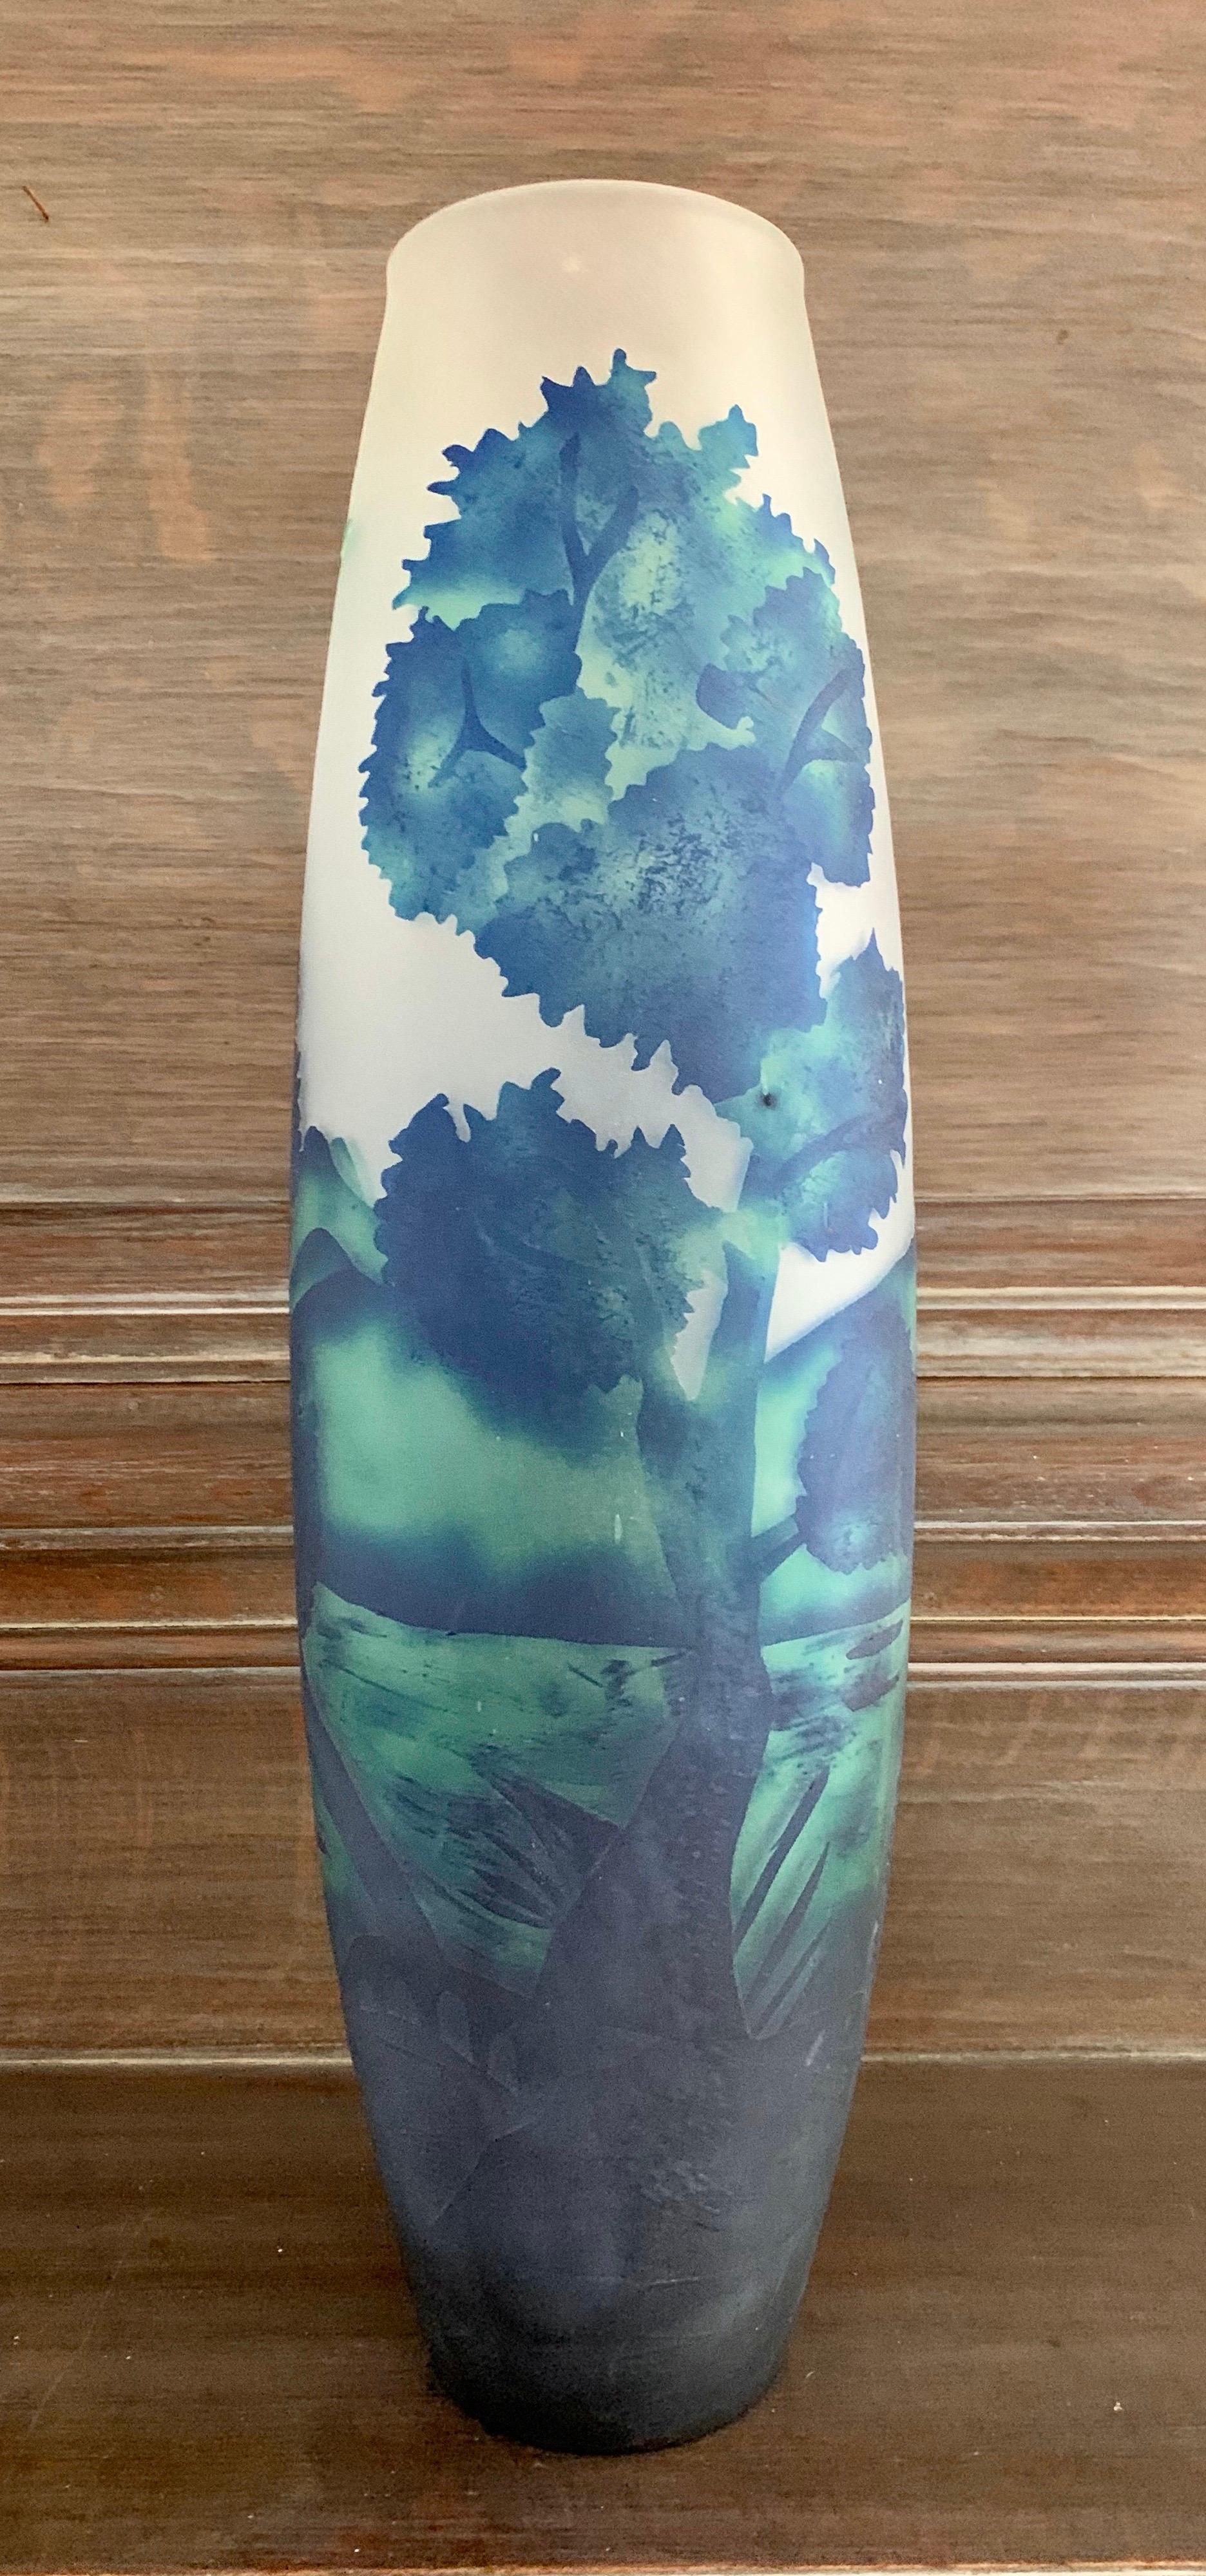 Unusual Art Nouveau etched glass vase that measures twenty inches tall by seven inches wide.
The color scheme is spectacular, with blues and greens on etched glass, again very unusual.
No signatures, circa 1970s. Great condition with no flaws.